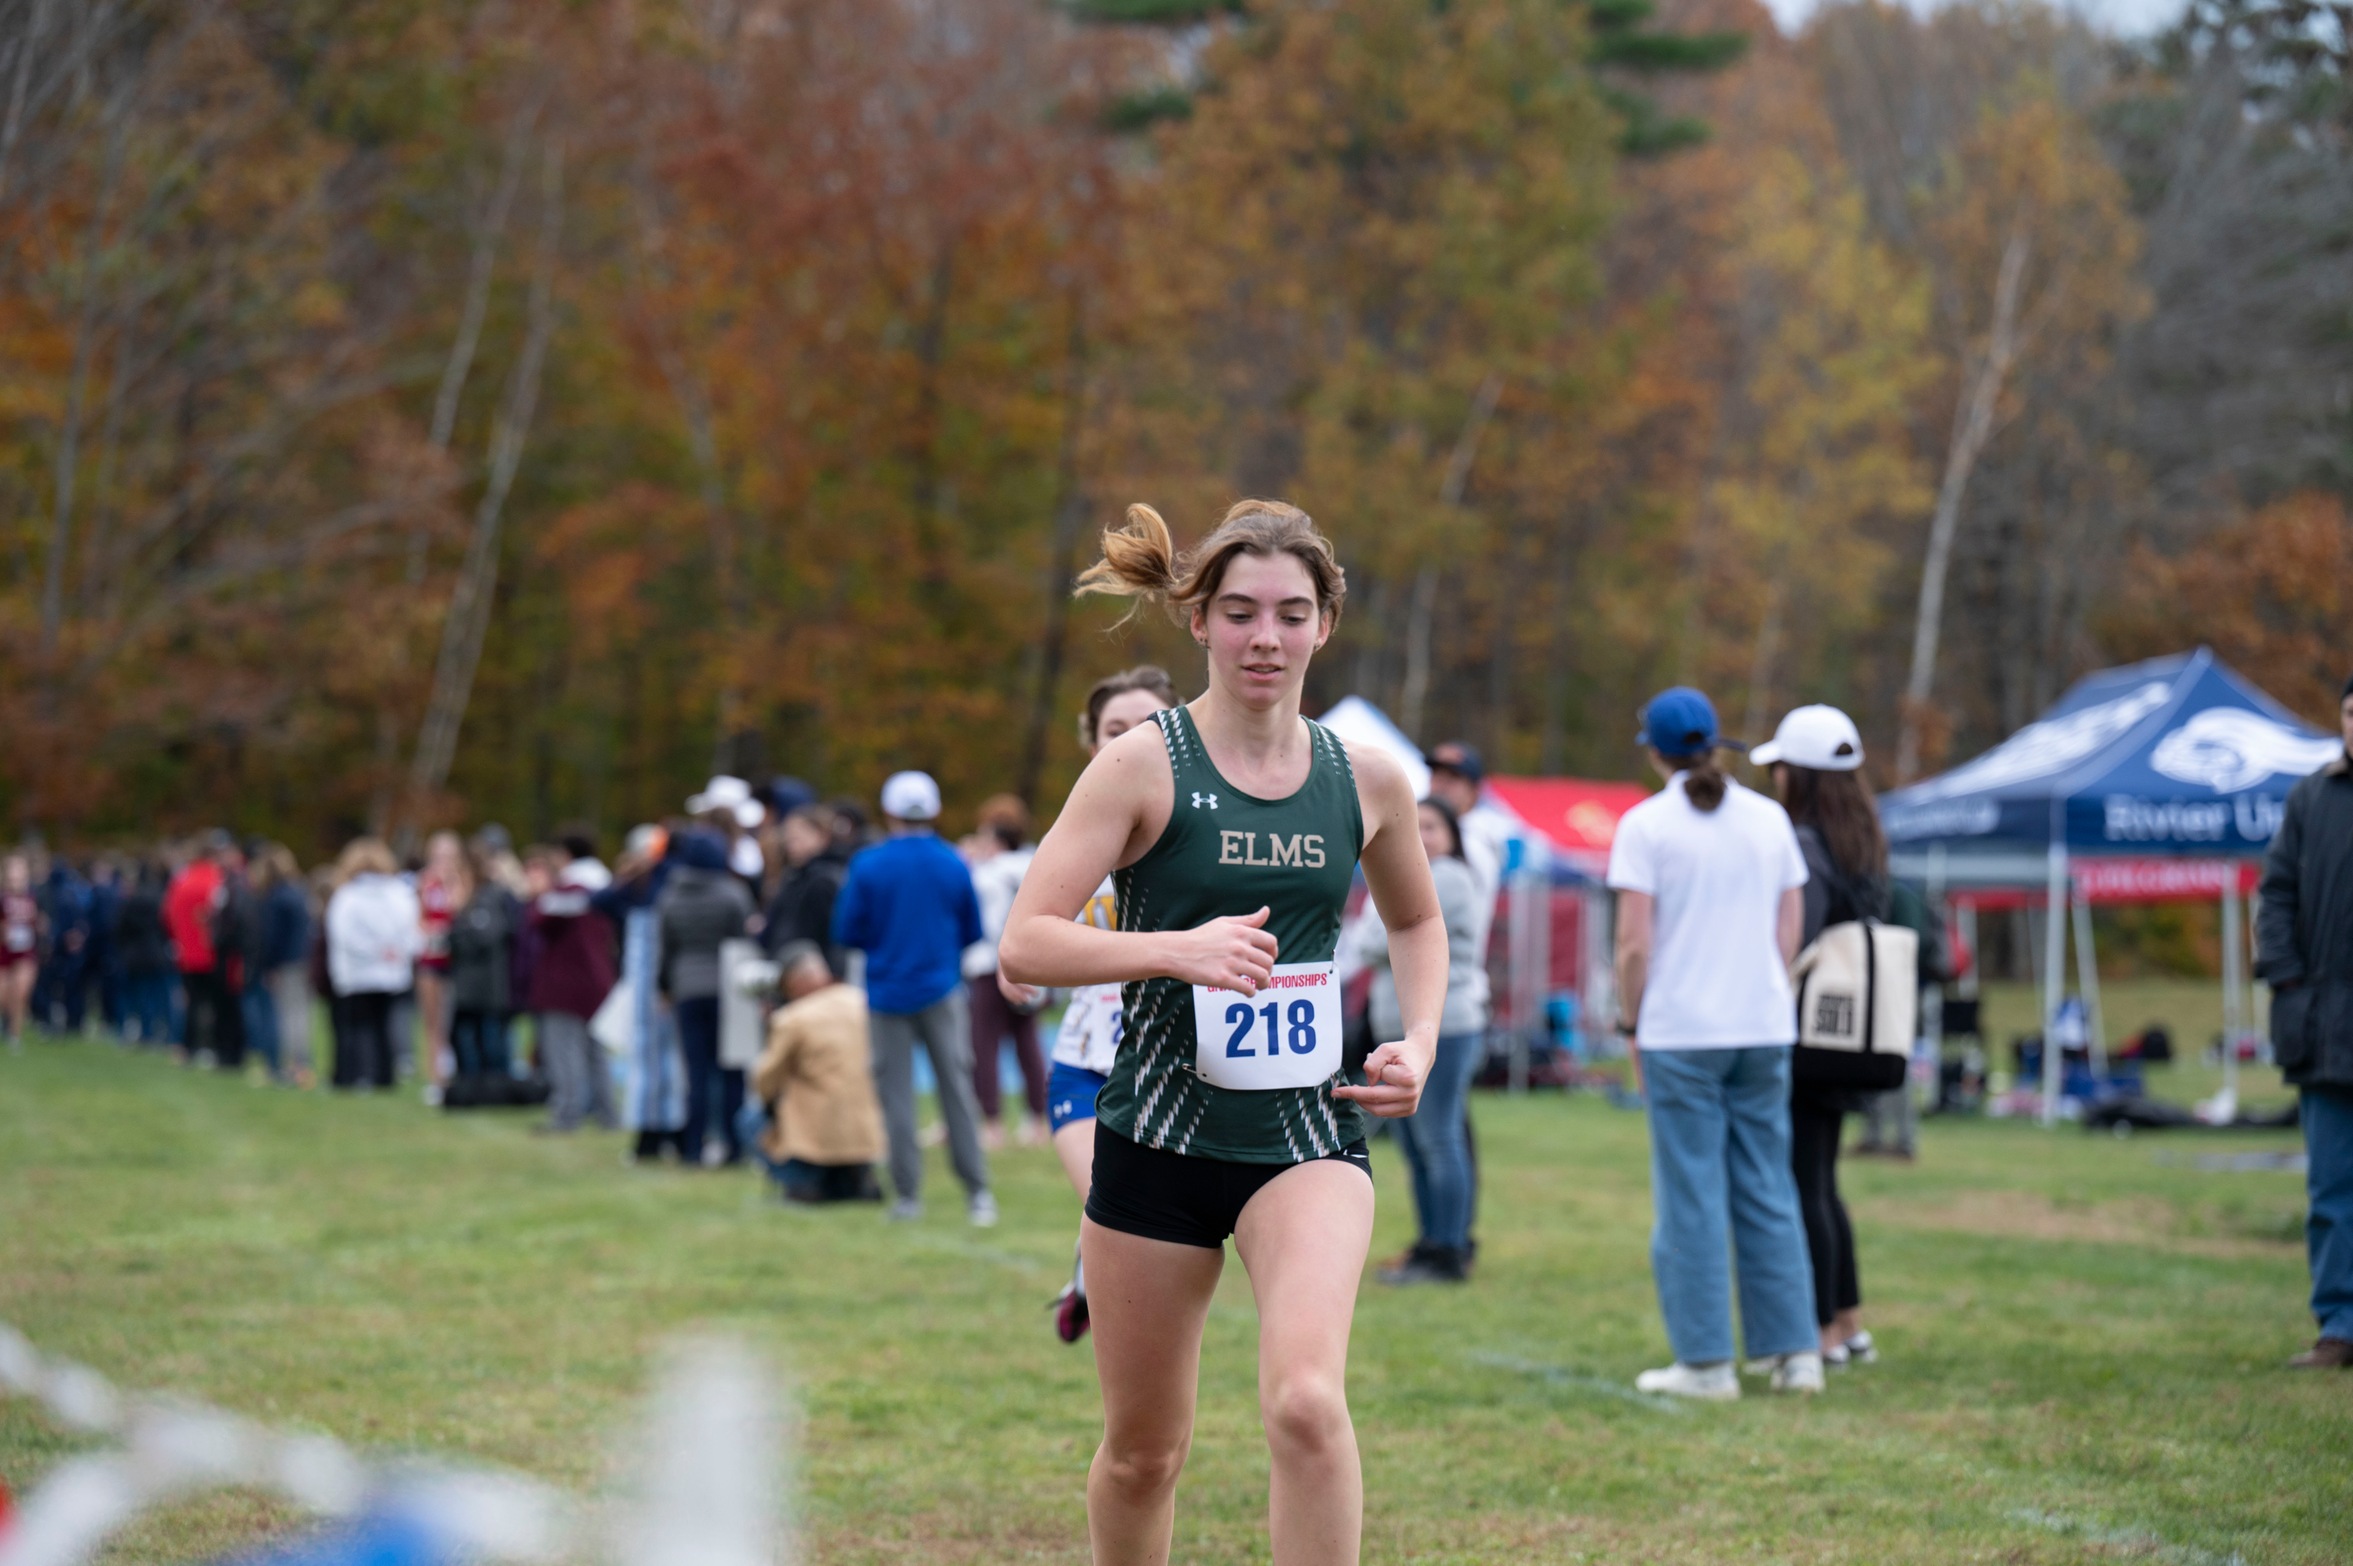 Elms College Cross Country Team Competed at GNAC Championship